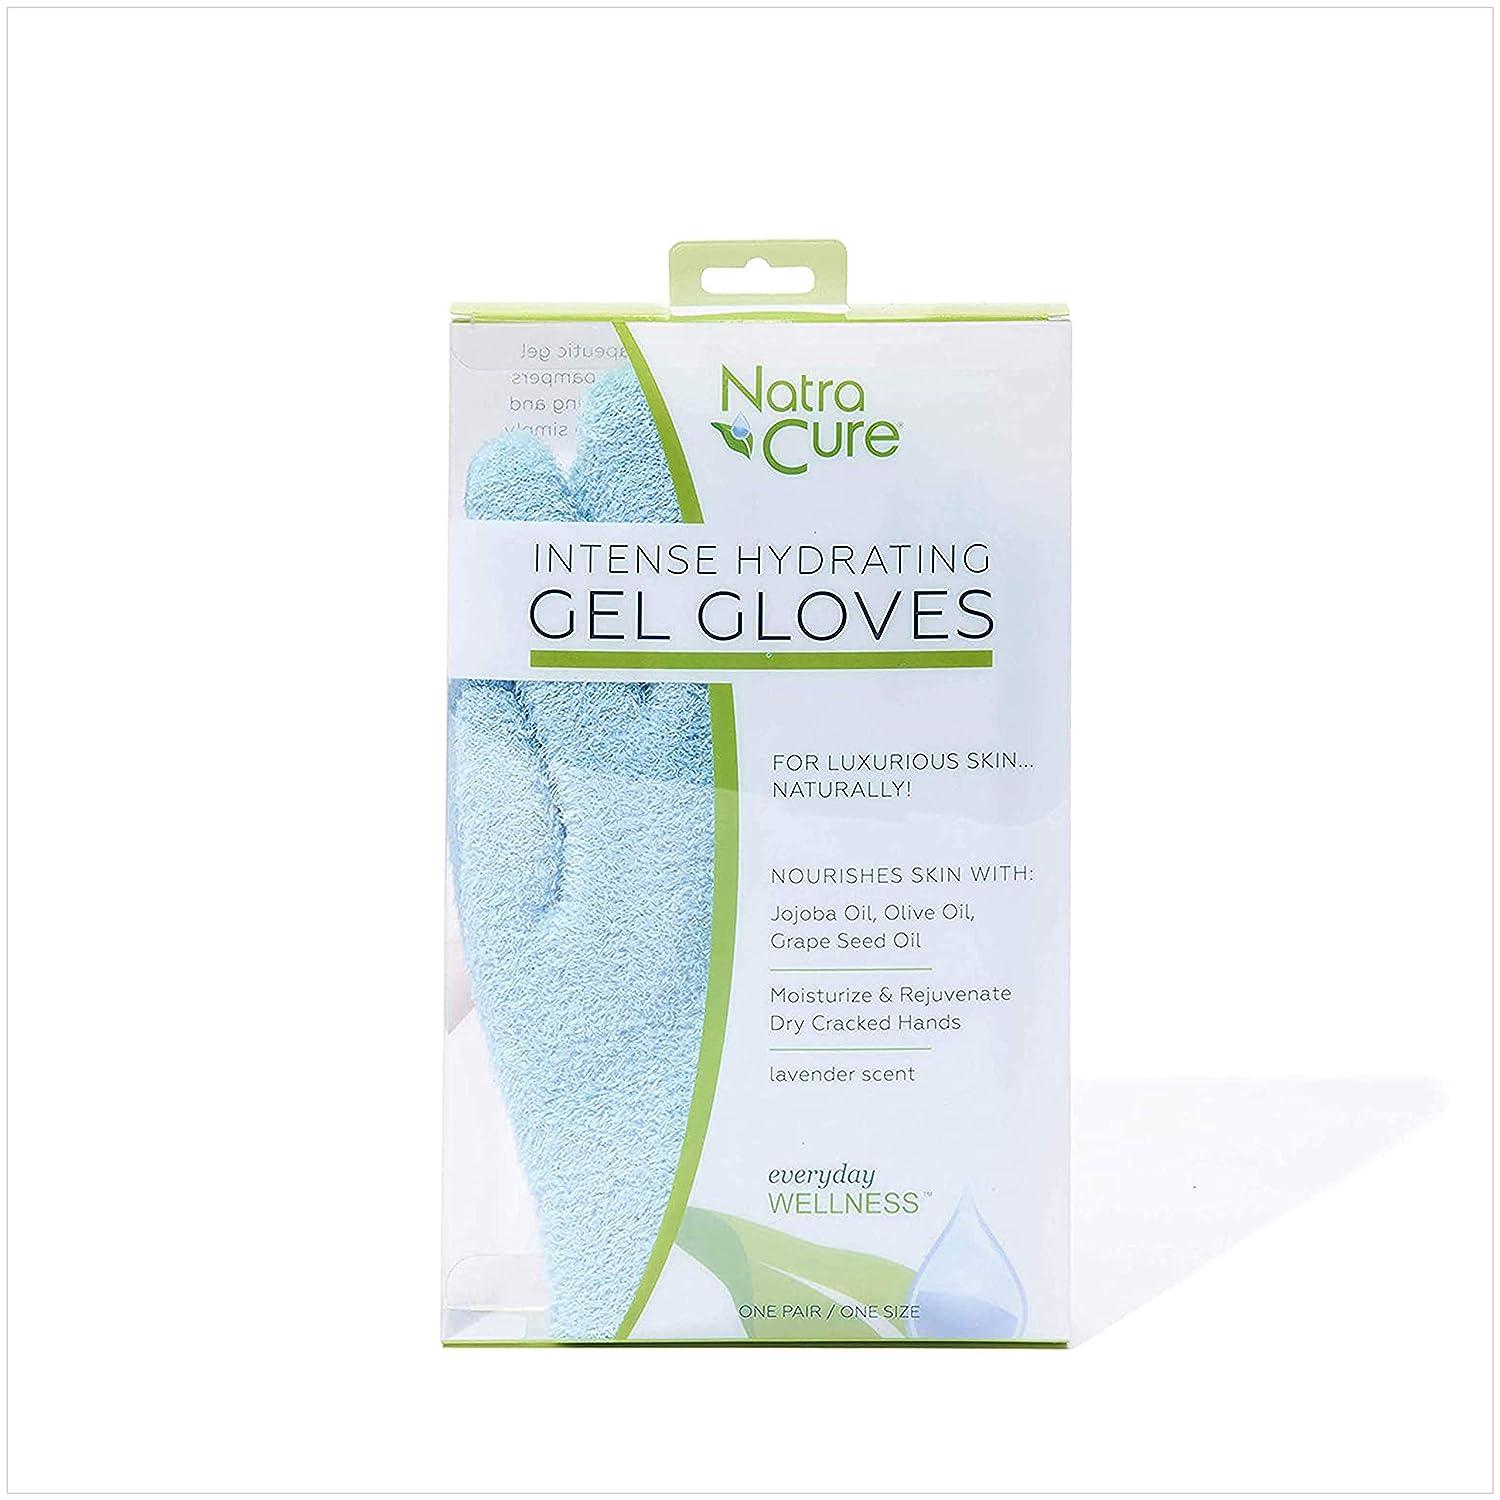 NatraCure Moisturizing Gel Gloves - (for Dry Cracked Skin Aging Hands  Cuticles Eczema After Hand Washing Instead of Overnight Sleeping Gloves  Lotion Cream) - Color: Aqua